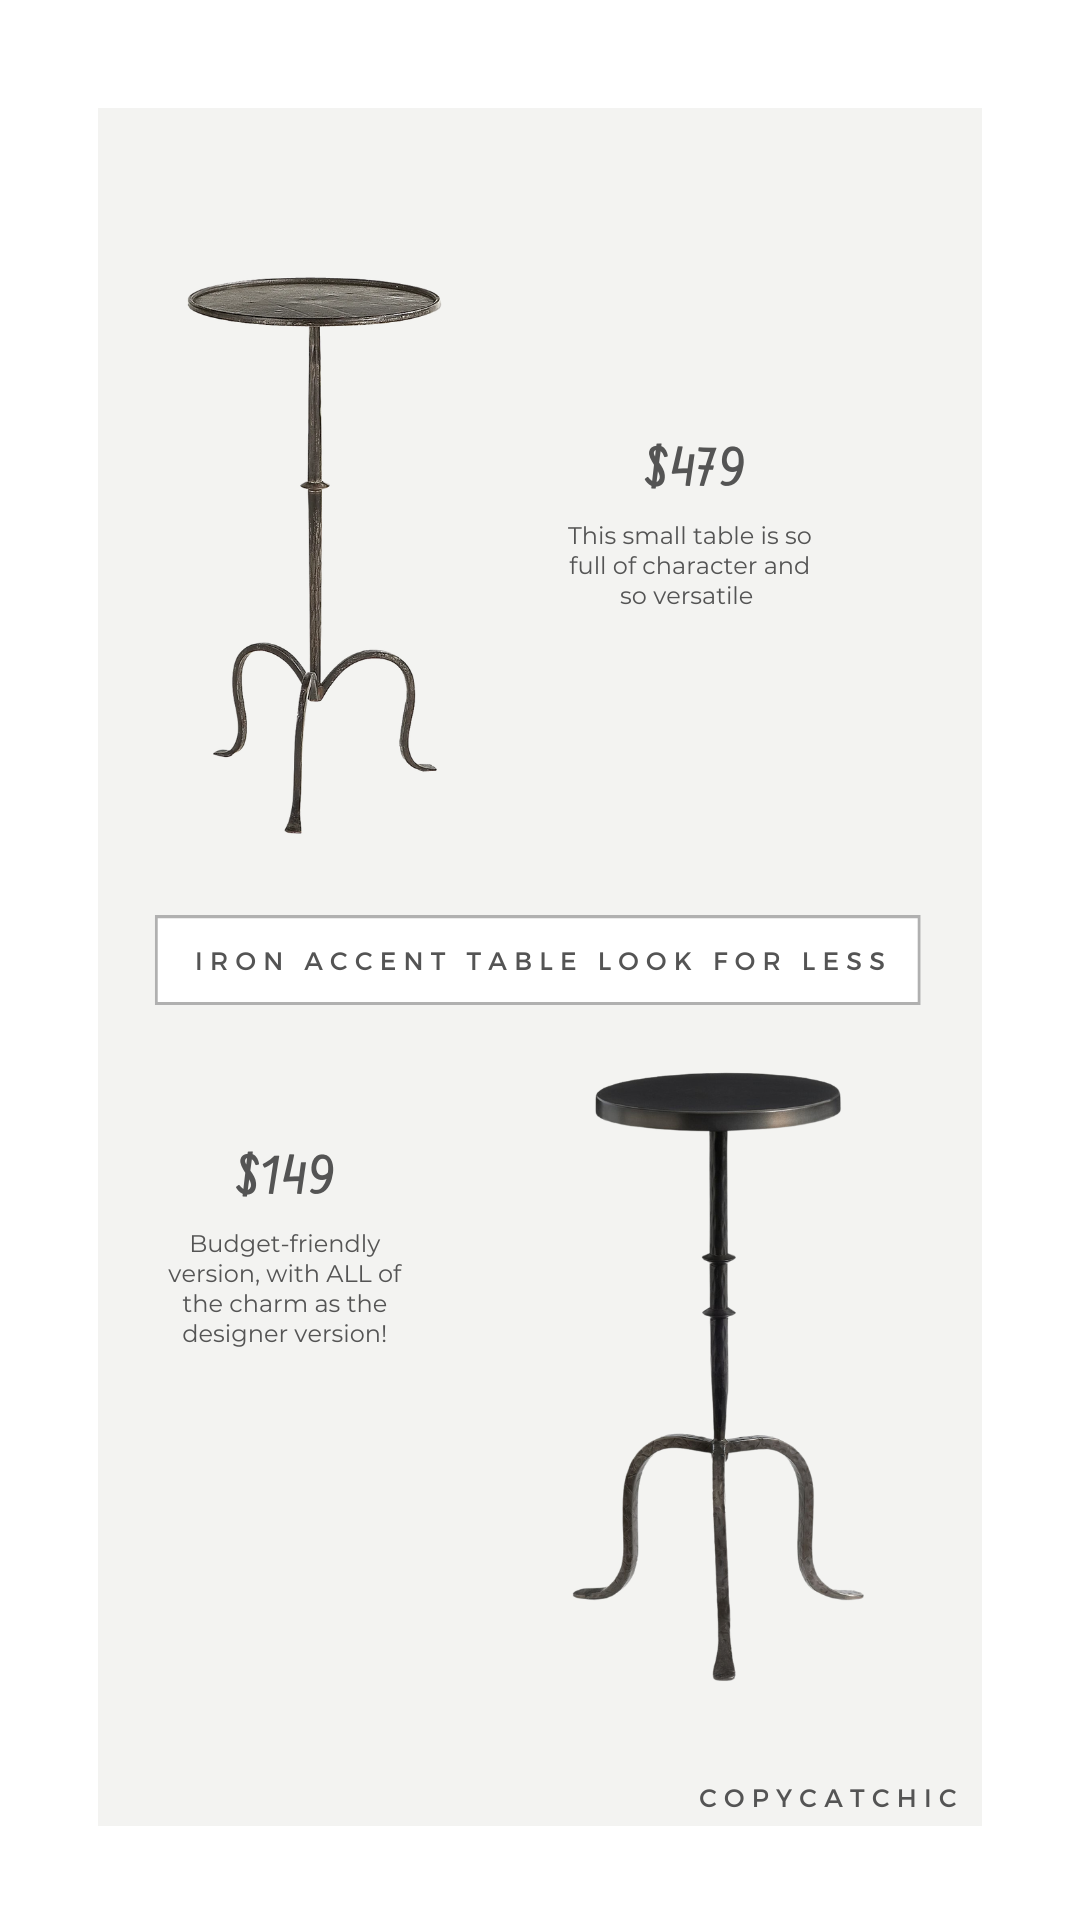 Daily Find: Burke Decor Hand-Forged Martini Table vs Pottery Barn Charleston Round Iron Accent Table, iron end table look for less, copycatchic luxe living for less, budget home decor and design, daily dupes, home trends, sales, budget travel and room inspiration